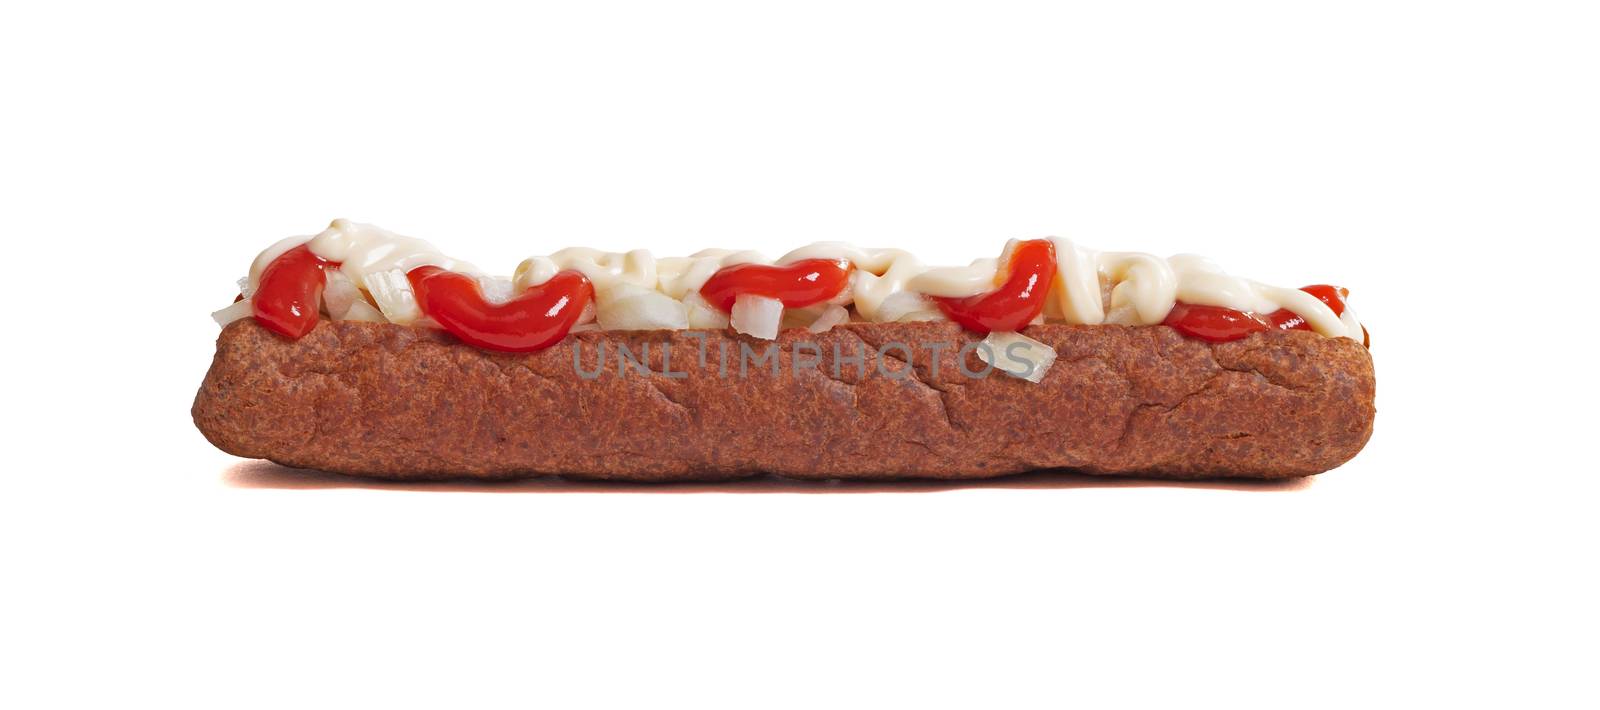 One frikadel with ketchup, mayonnaise on chopped onions, a Dutch fast food snack called 'frikadel speciaal', the Netherlands